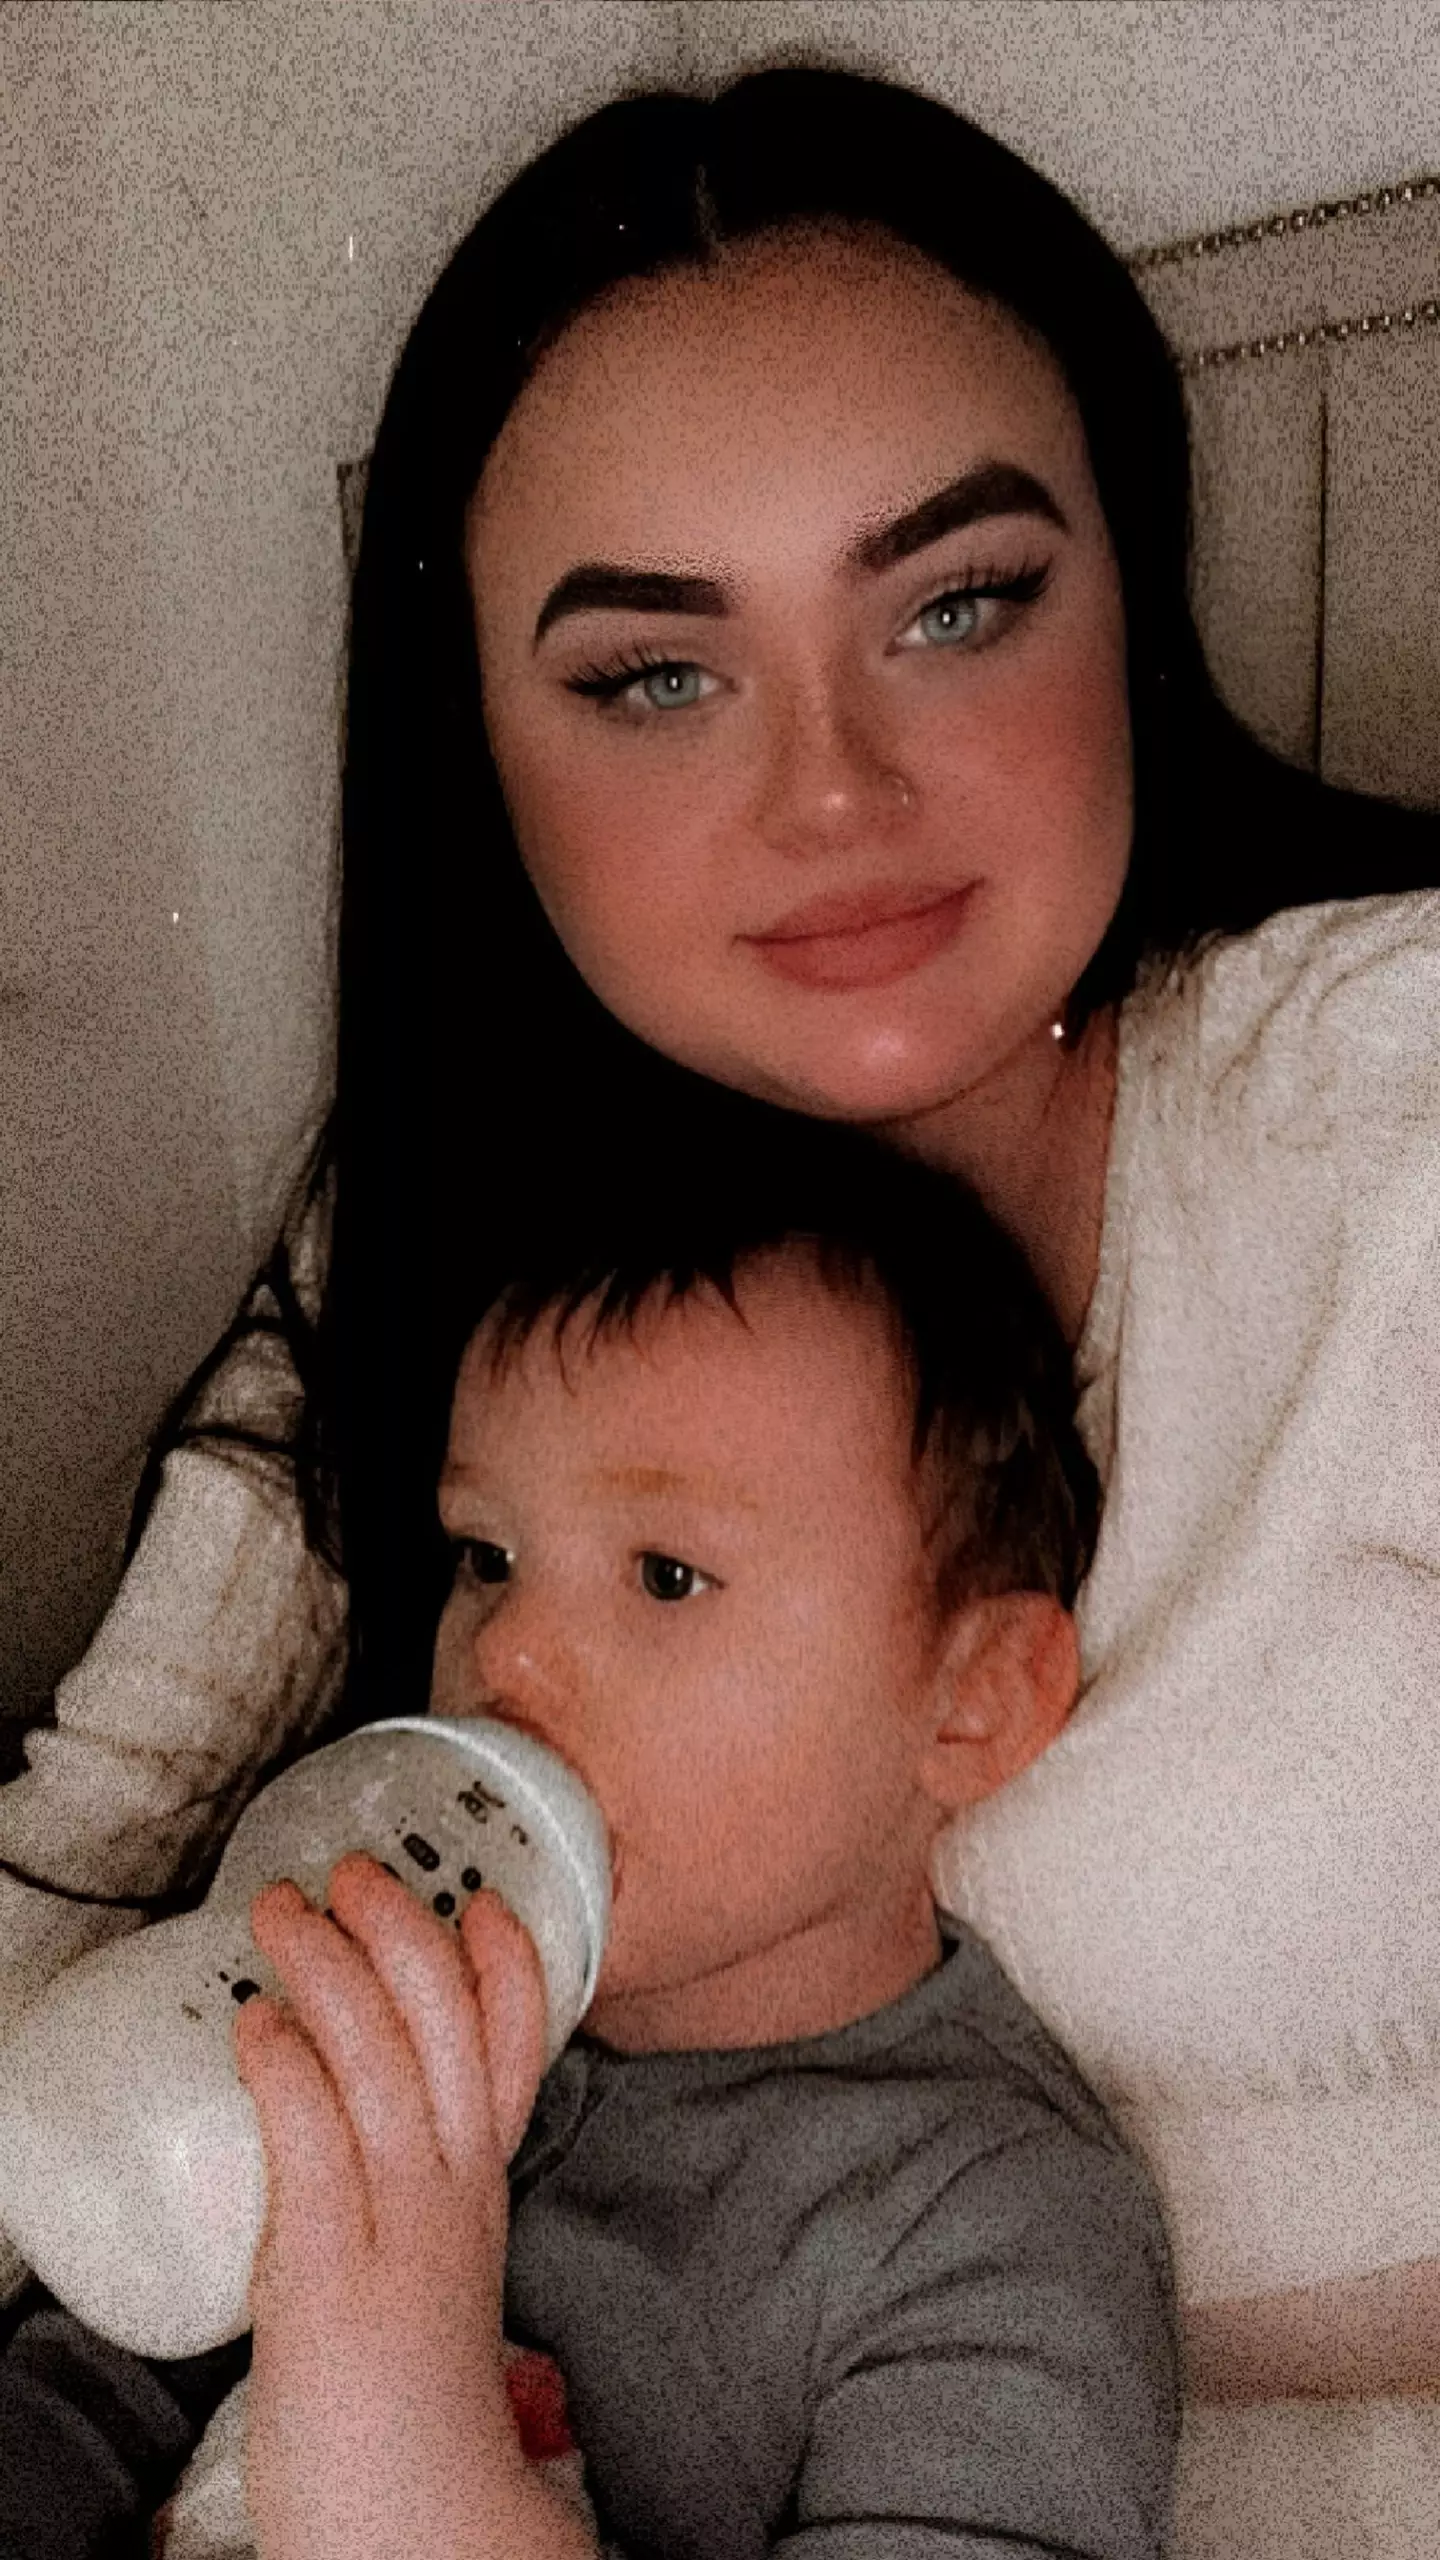 Natalie Mathias rushed her 19-month-old son to hospital after 'raised and swollen' marks appeared on his head after using baby shampoo.